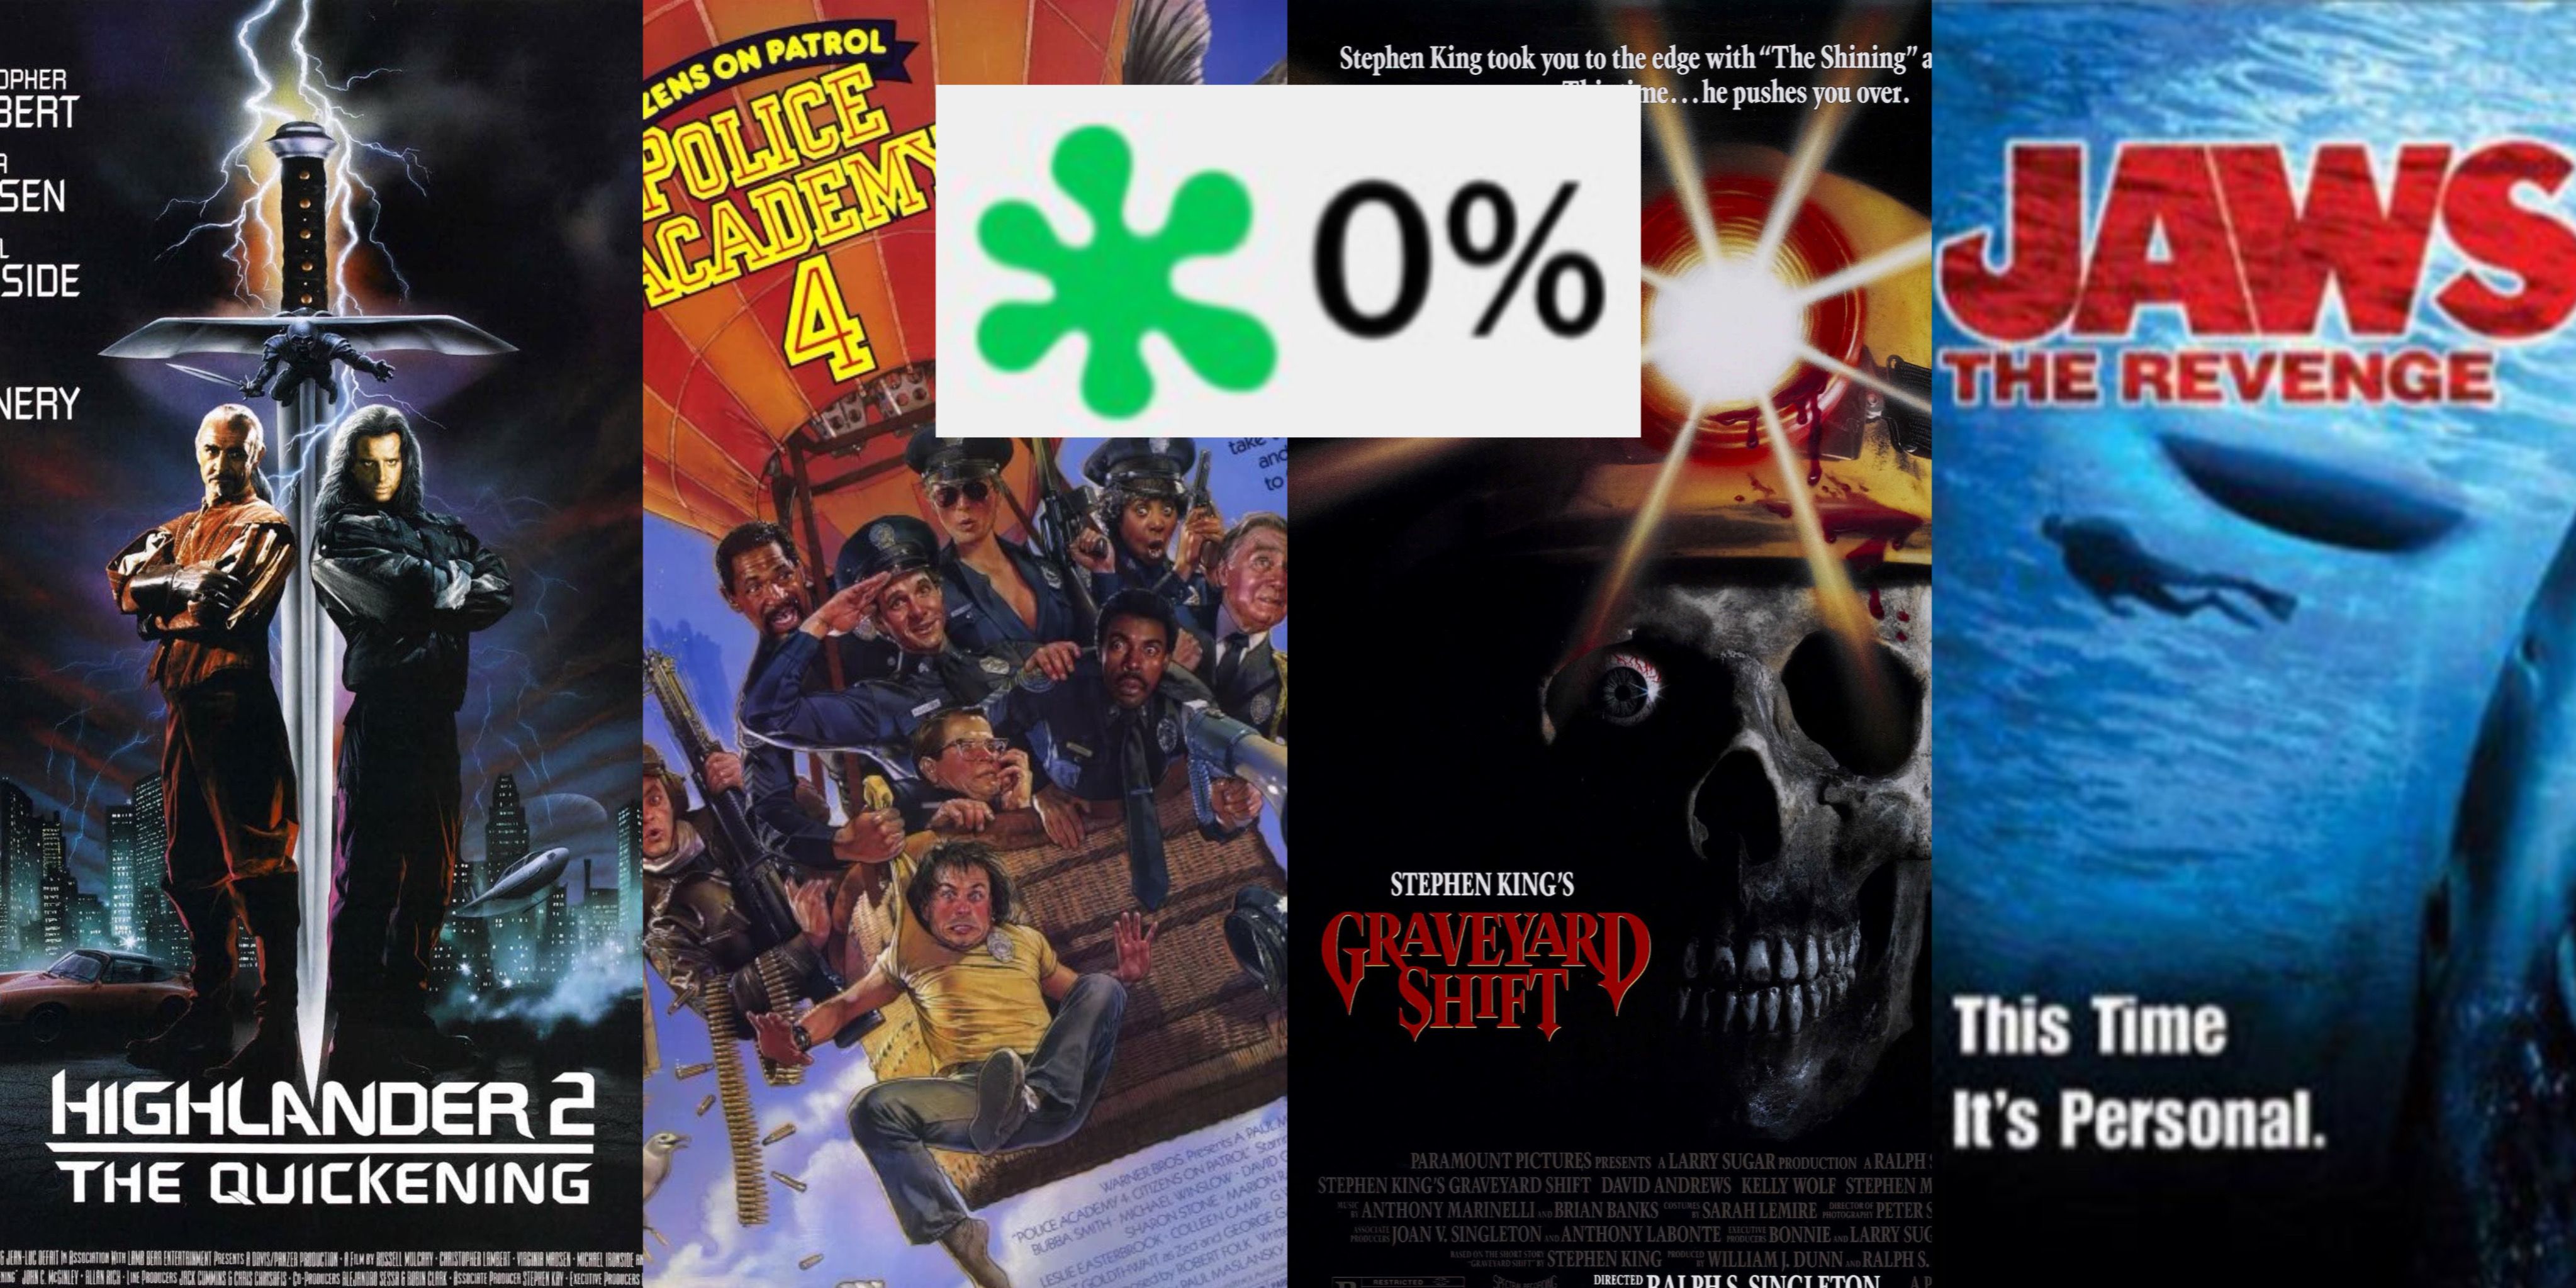 10 "Best" Movies With A 0 Rating On Rotten Tomatoes